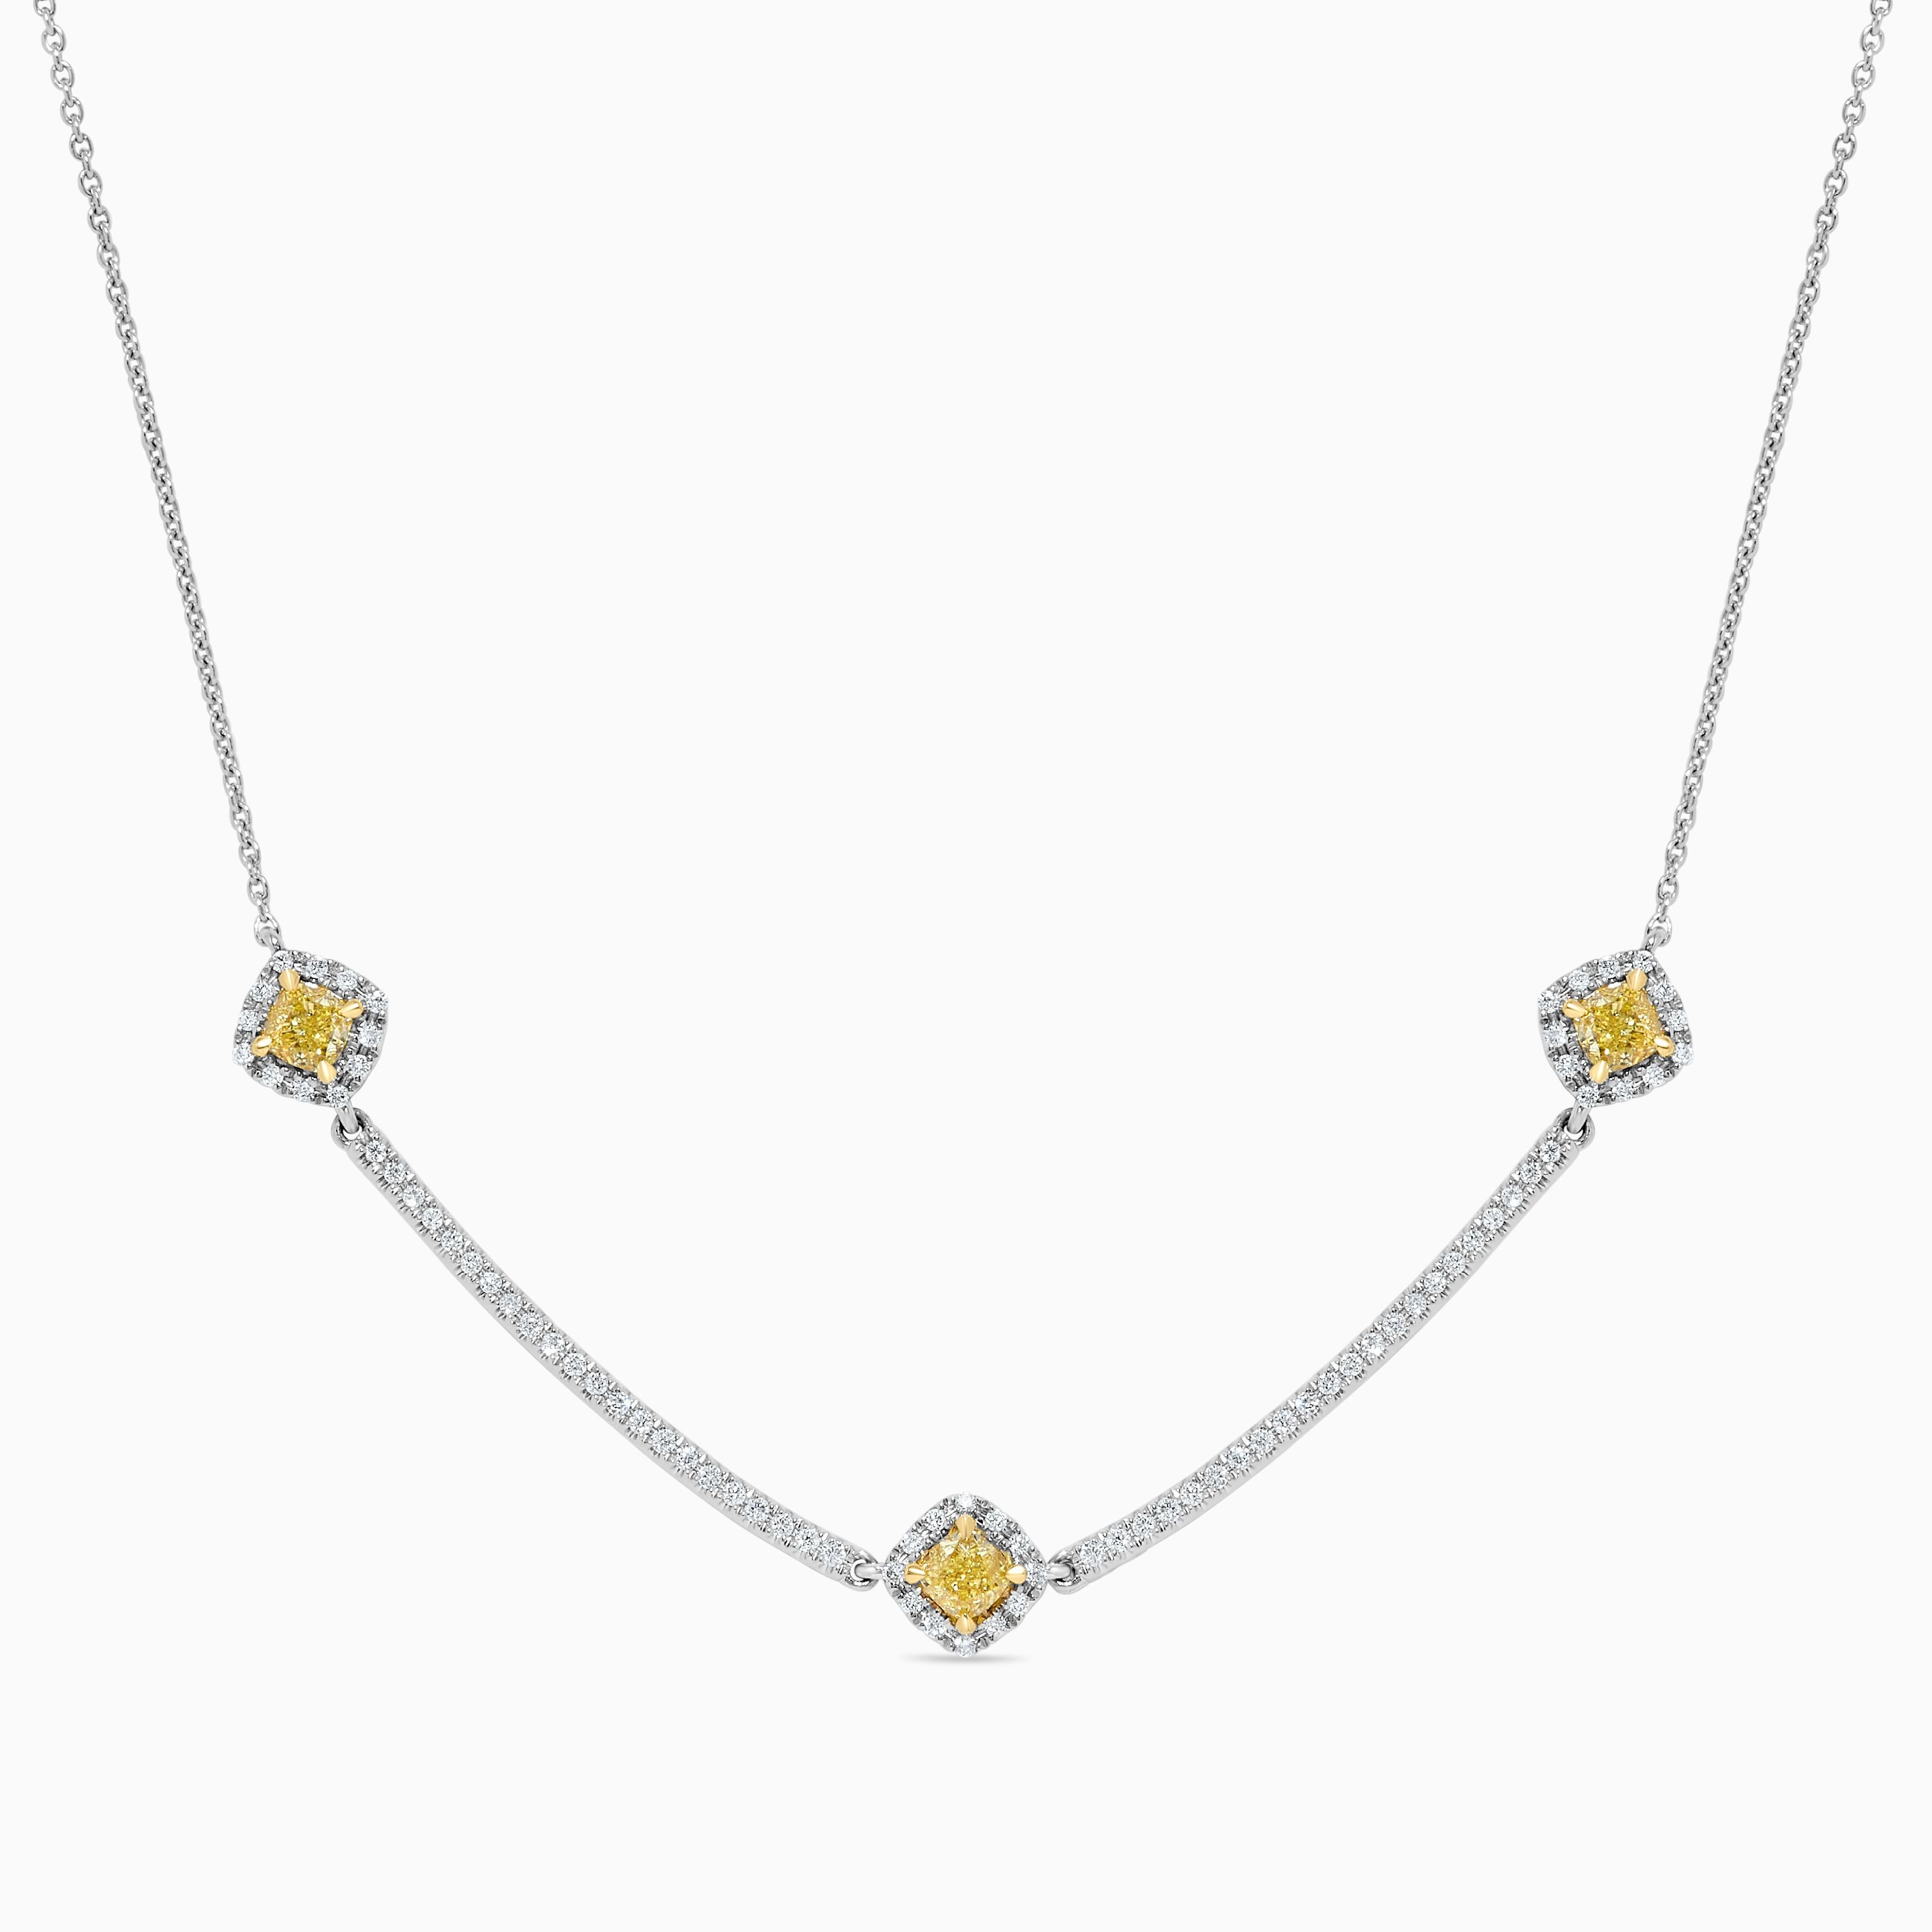 RareGemWorld's classic diamond necklace. Mounted in a beautiful 18K Yellow and White Gold setting with a natural cushion cut yellow diamond. The yellow diamond is surrounded by small round natural white diamond melee as well as diamonds throughout